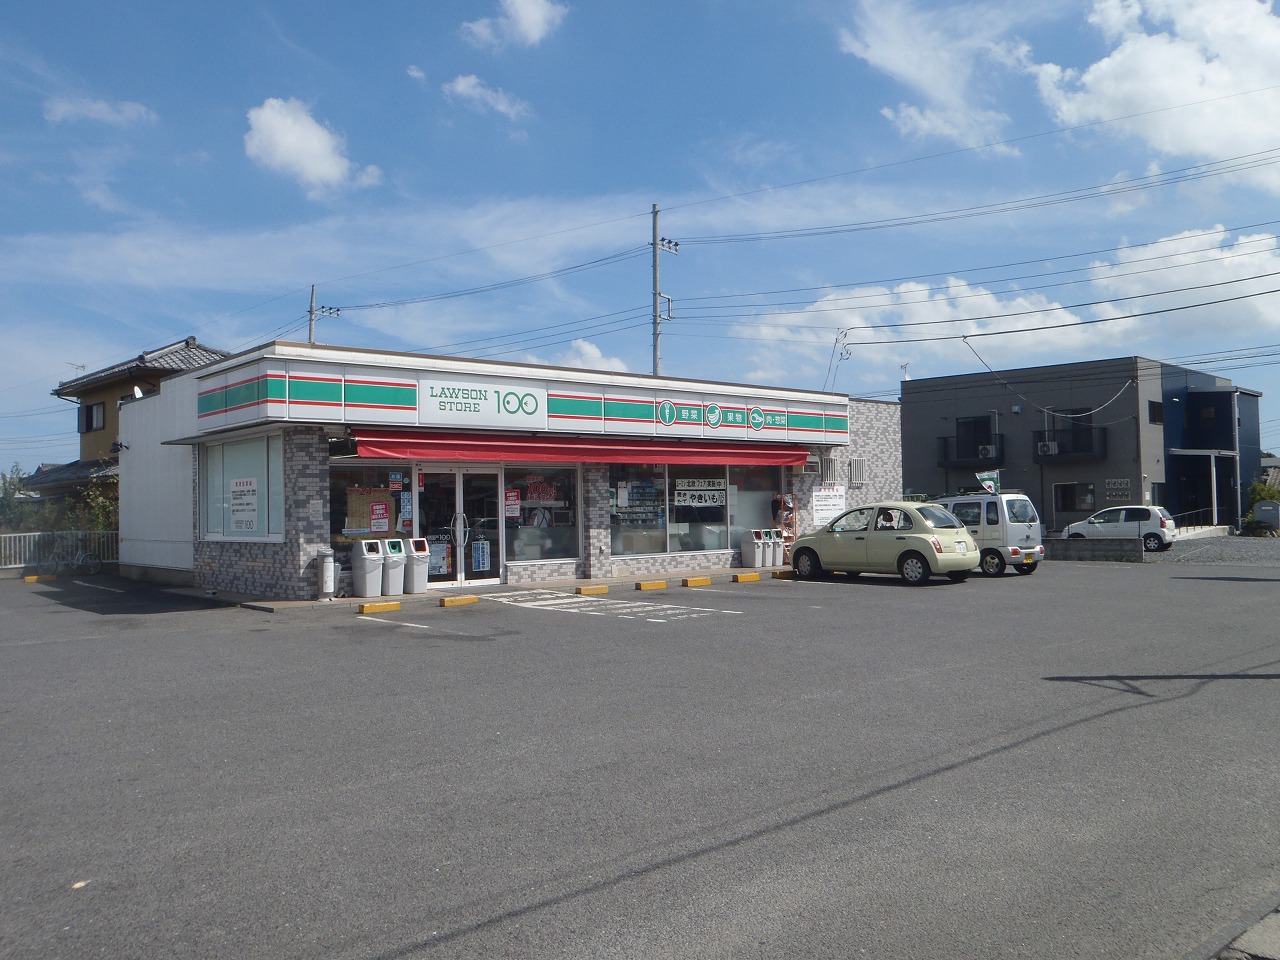 Convenience store. STORE100 Ohira store (convenience store) to 560m